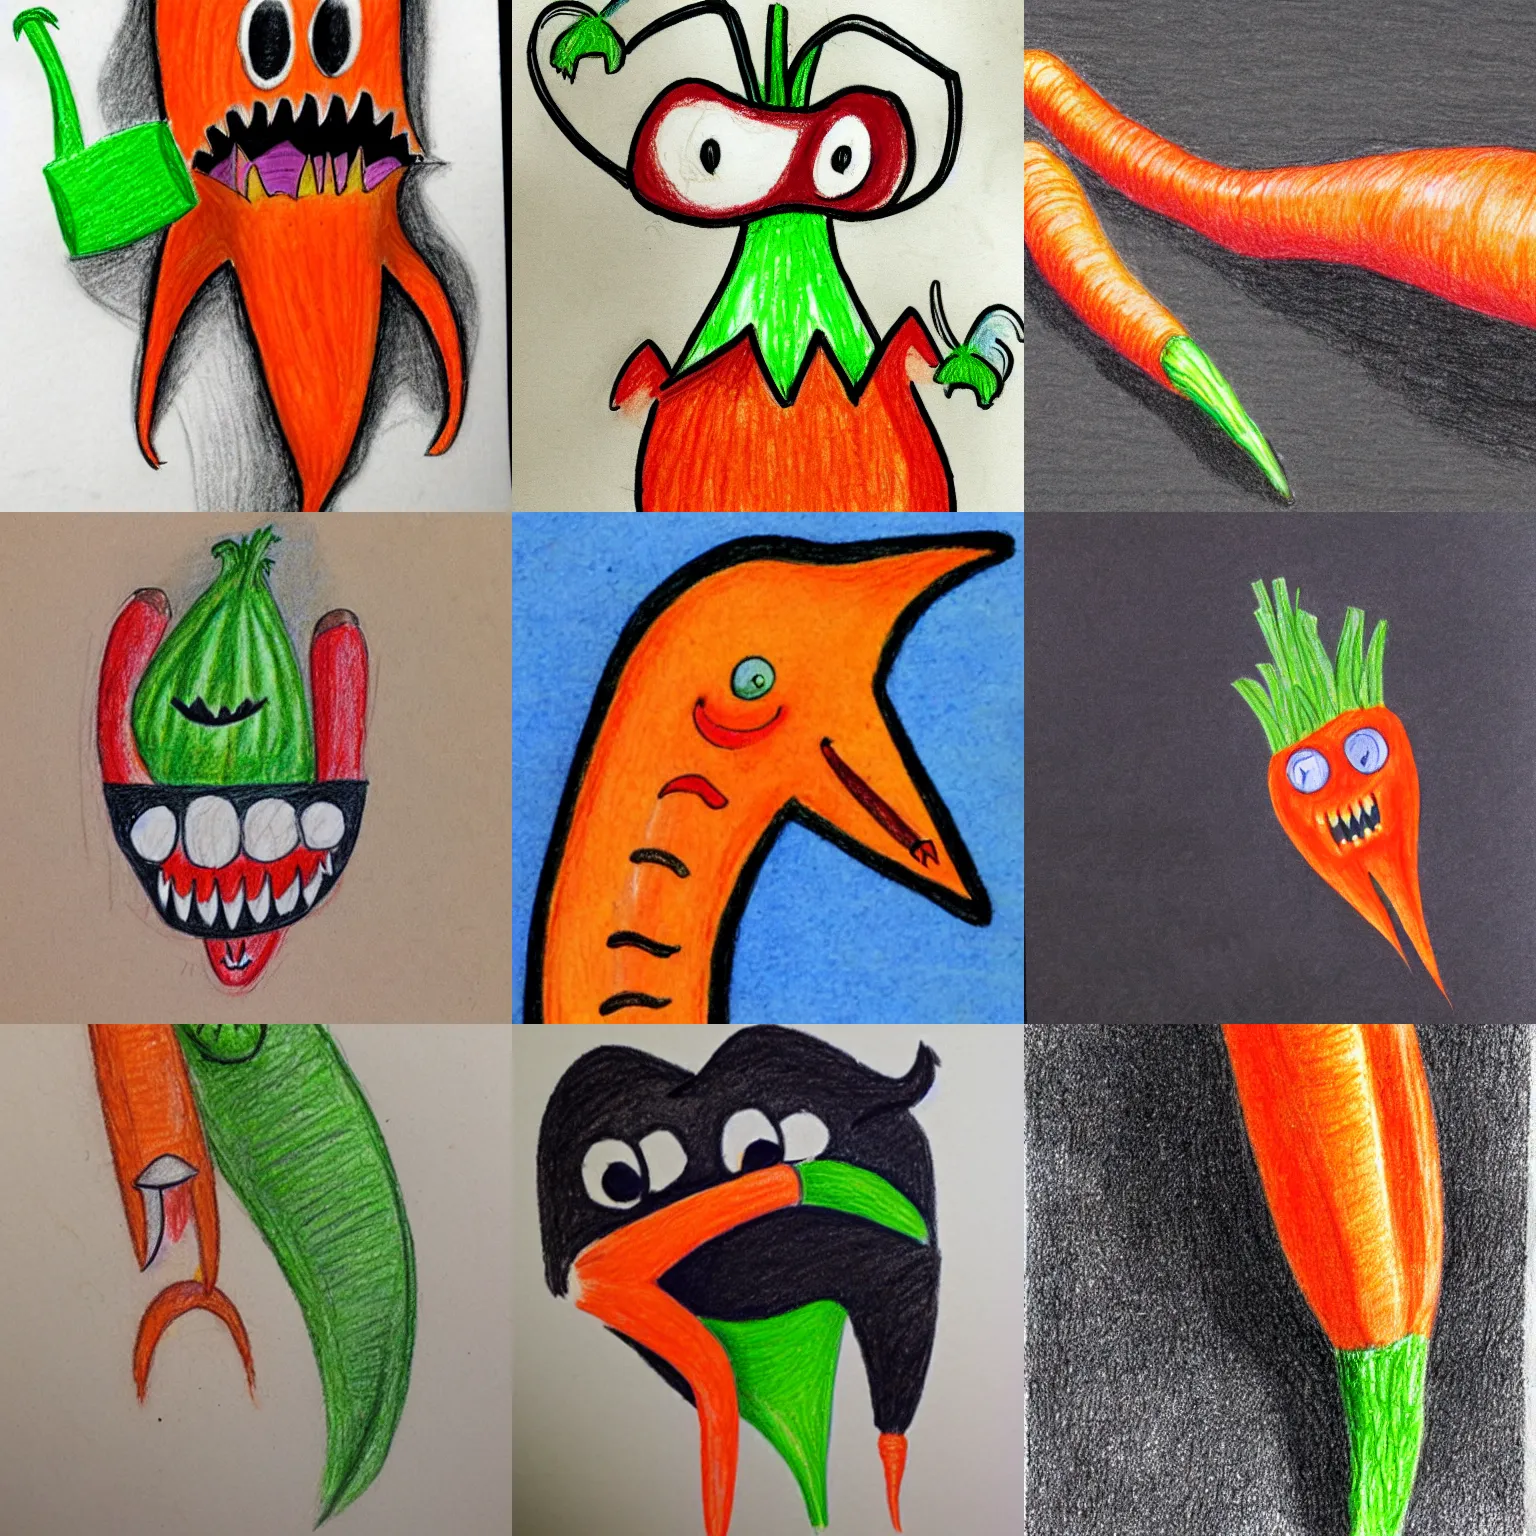 Prompt: a child's colored pencil drawing of a long and skinny carrot with an open mouth, sharp teeth, scary face, black background